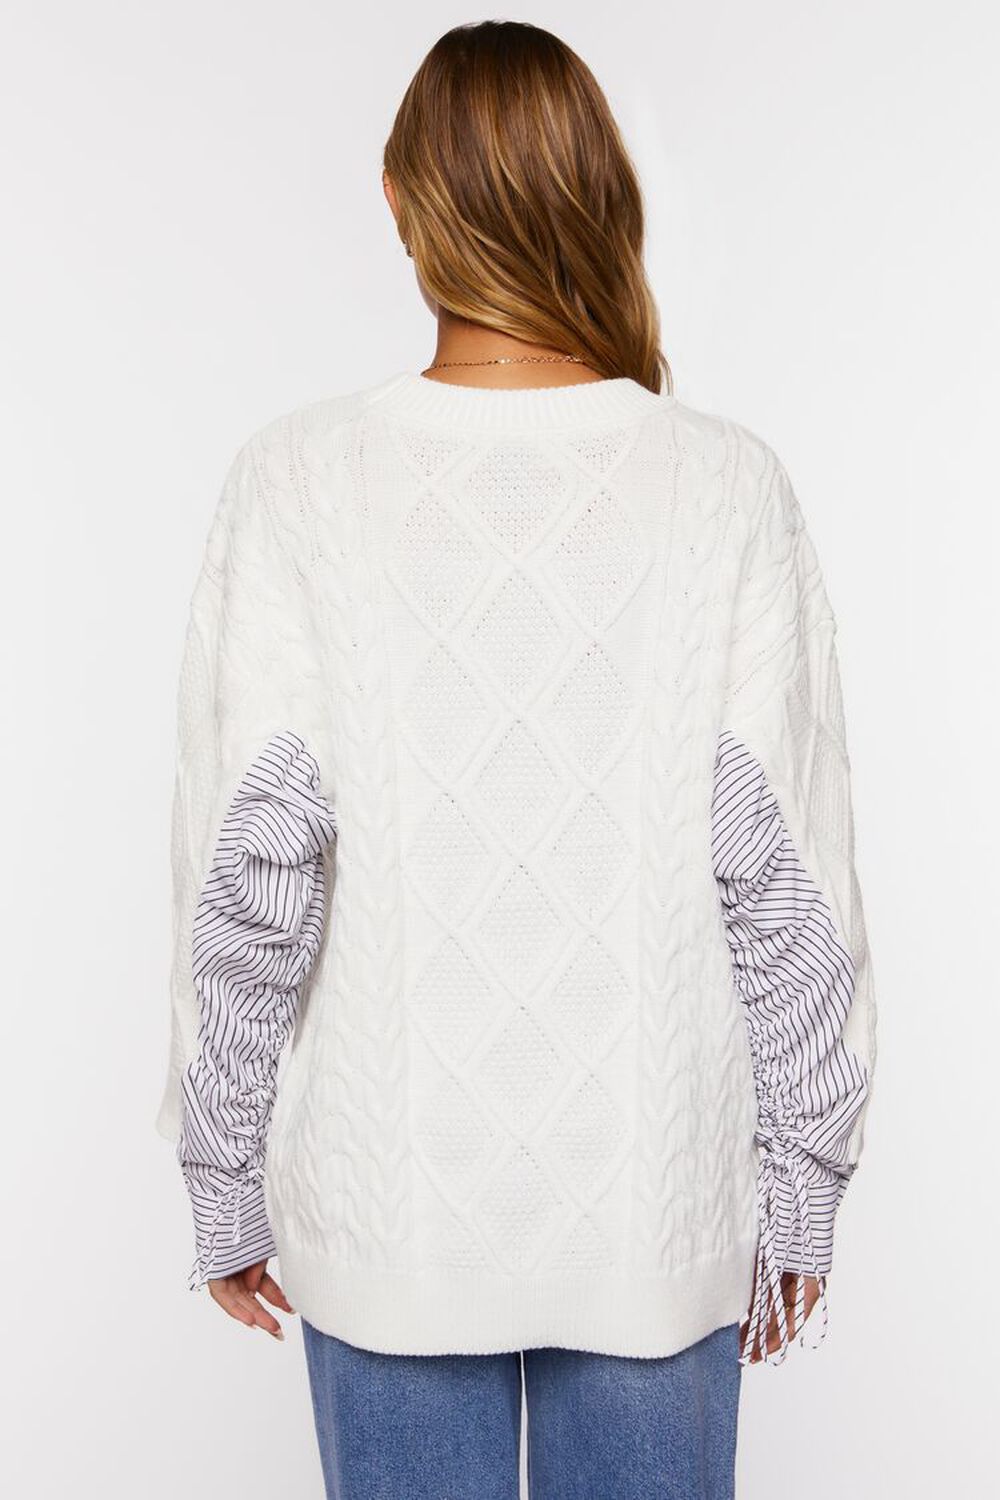 CREAM/MULTI Reworked-Sleeve Cable Knit Sweater, image 3